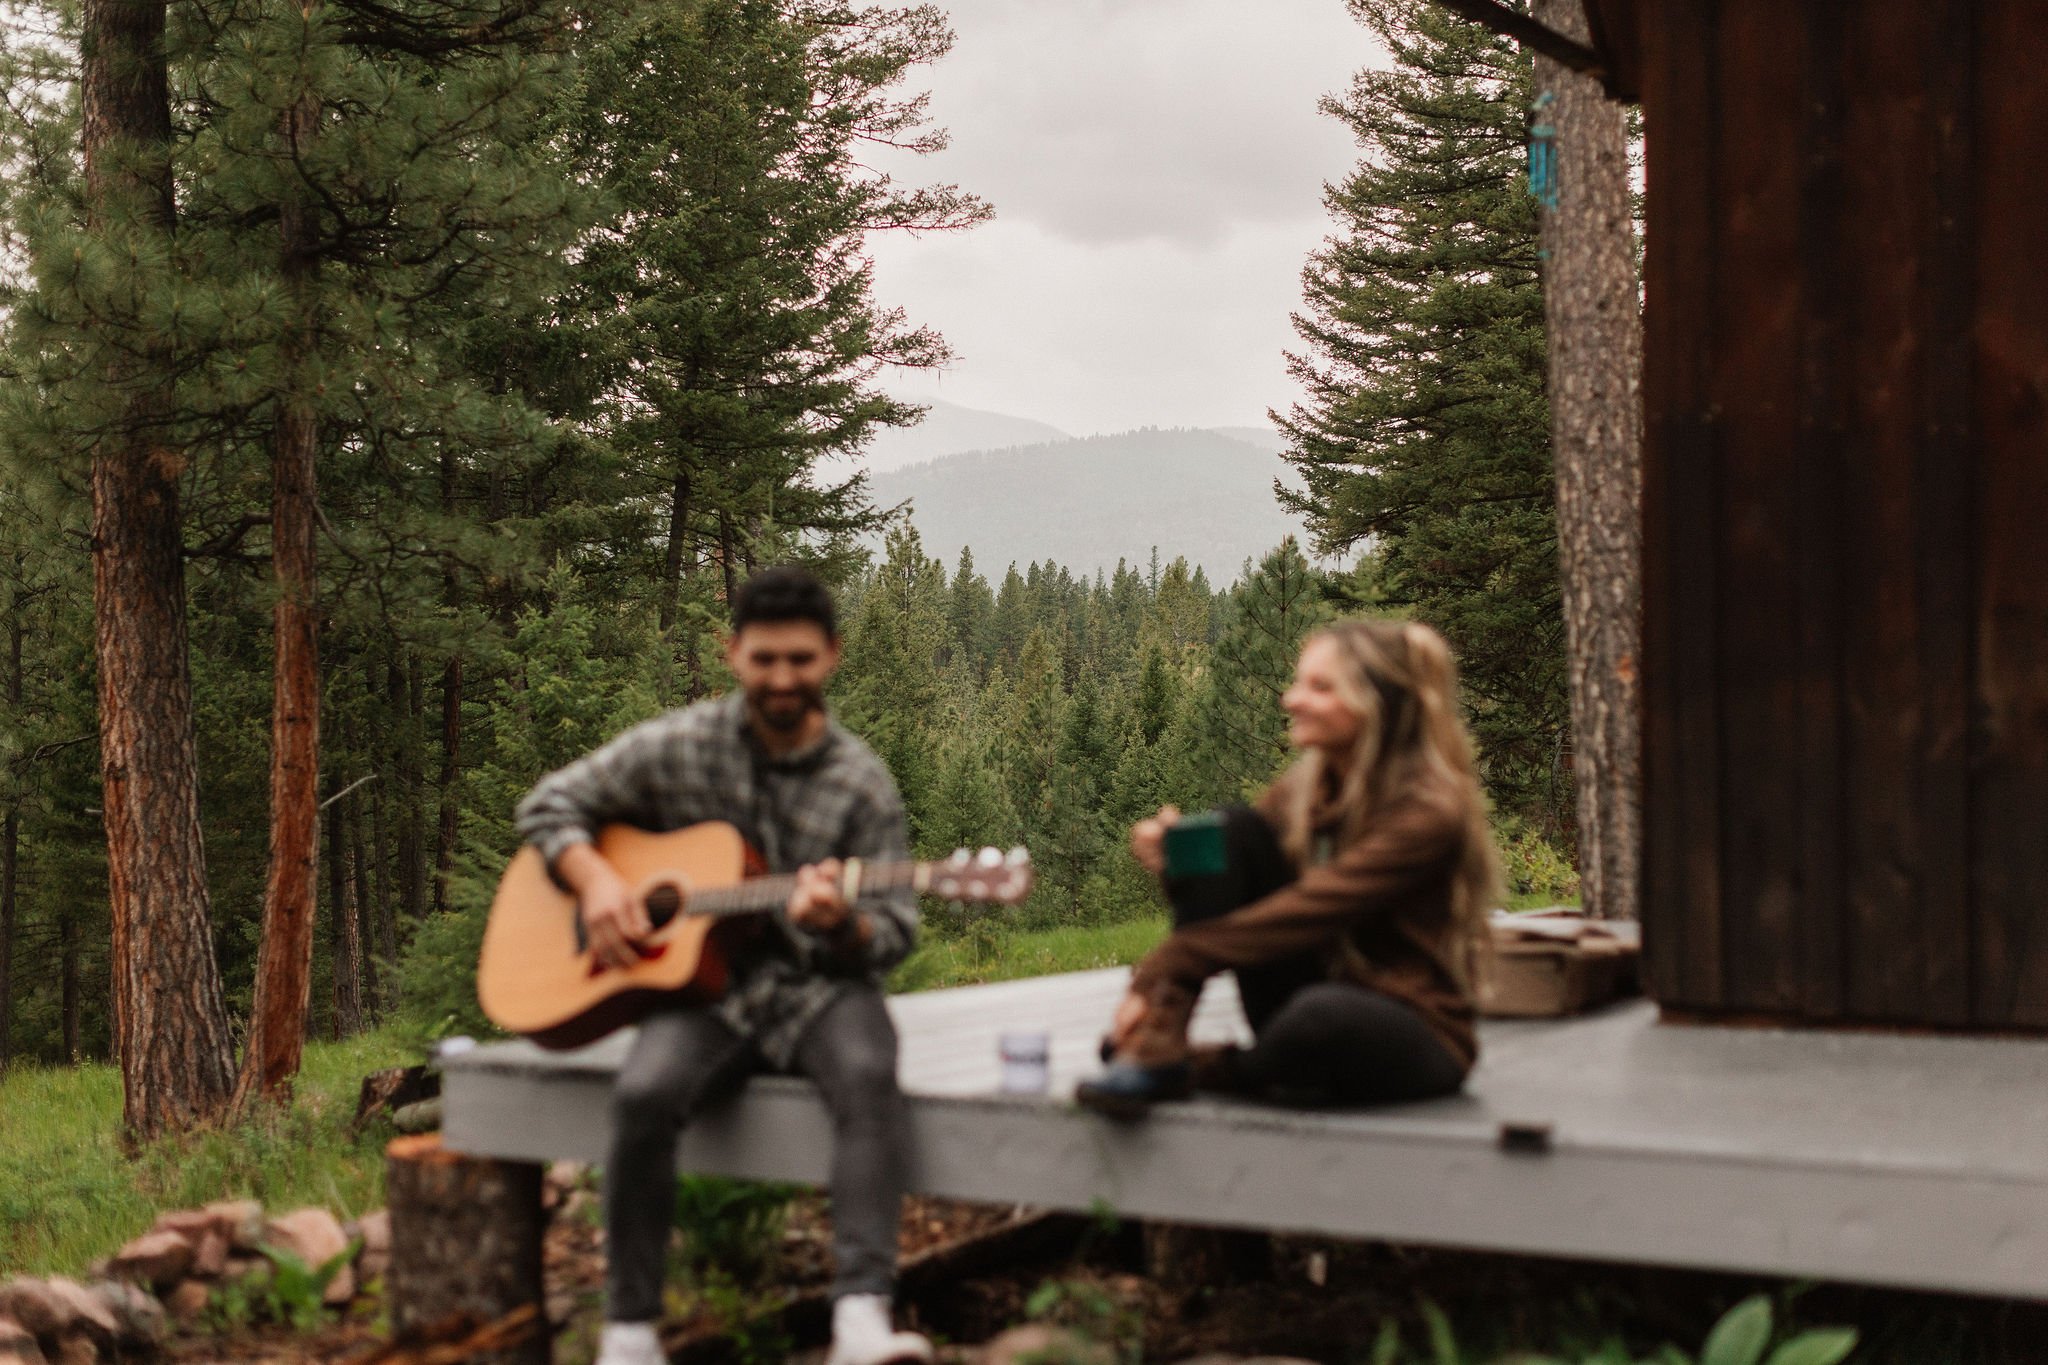 Unplug and enjoy the moments at The Hohnstead Glamping Cabins Resort near Missoula, Montana